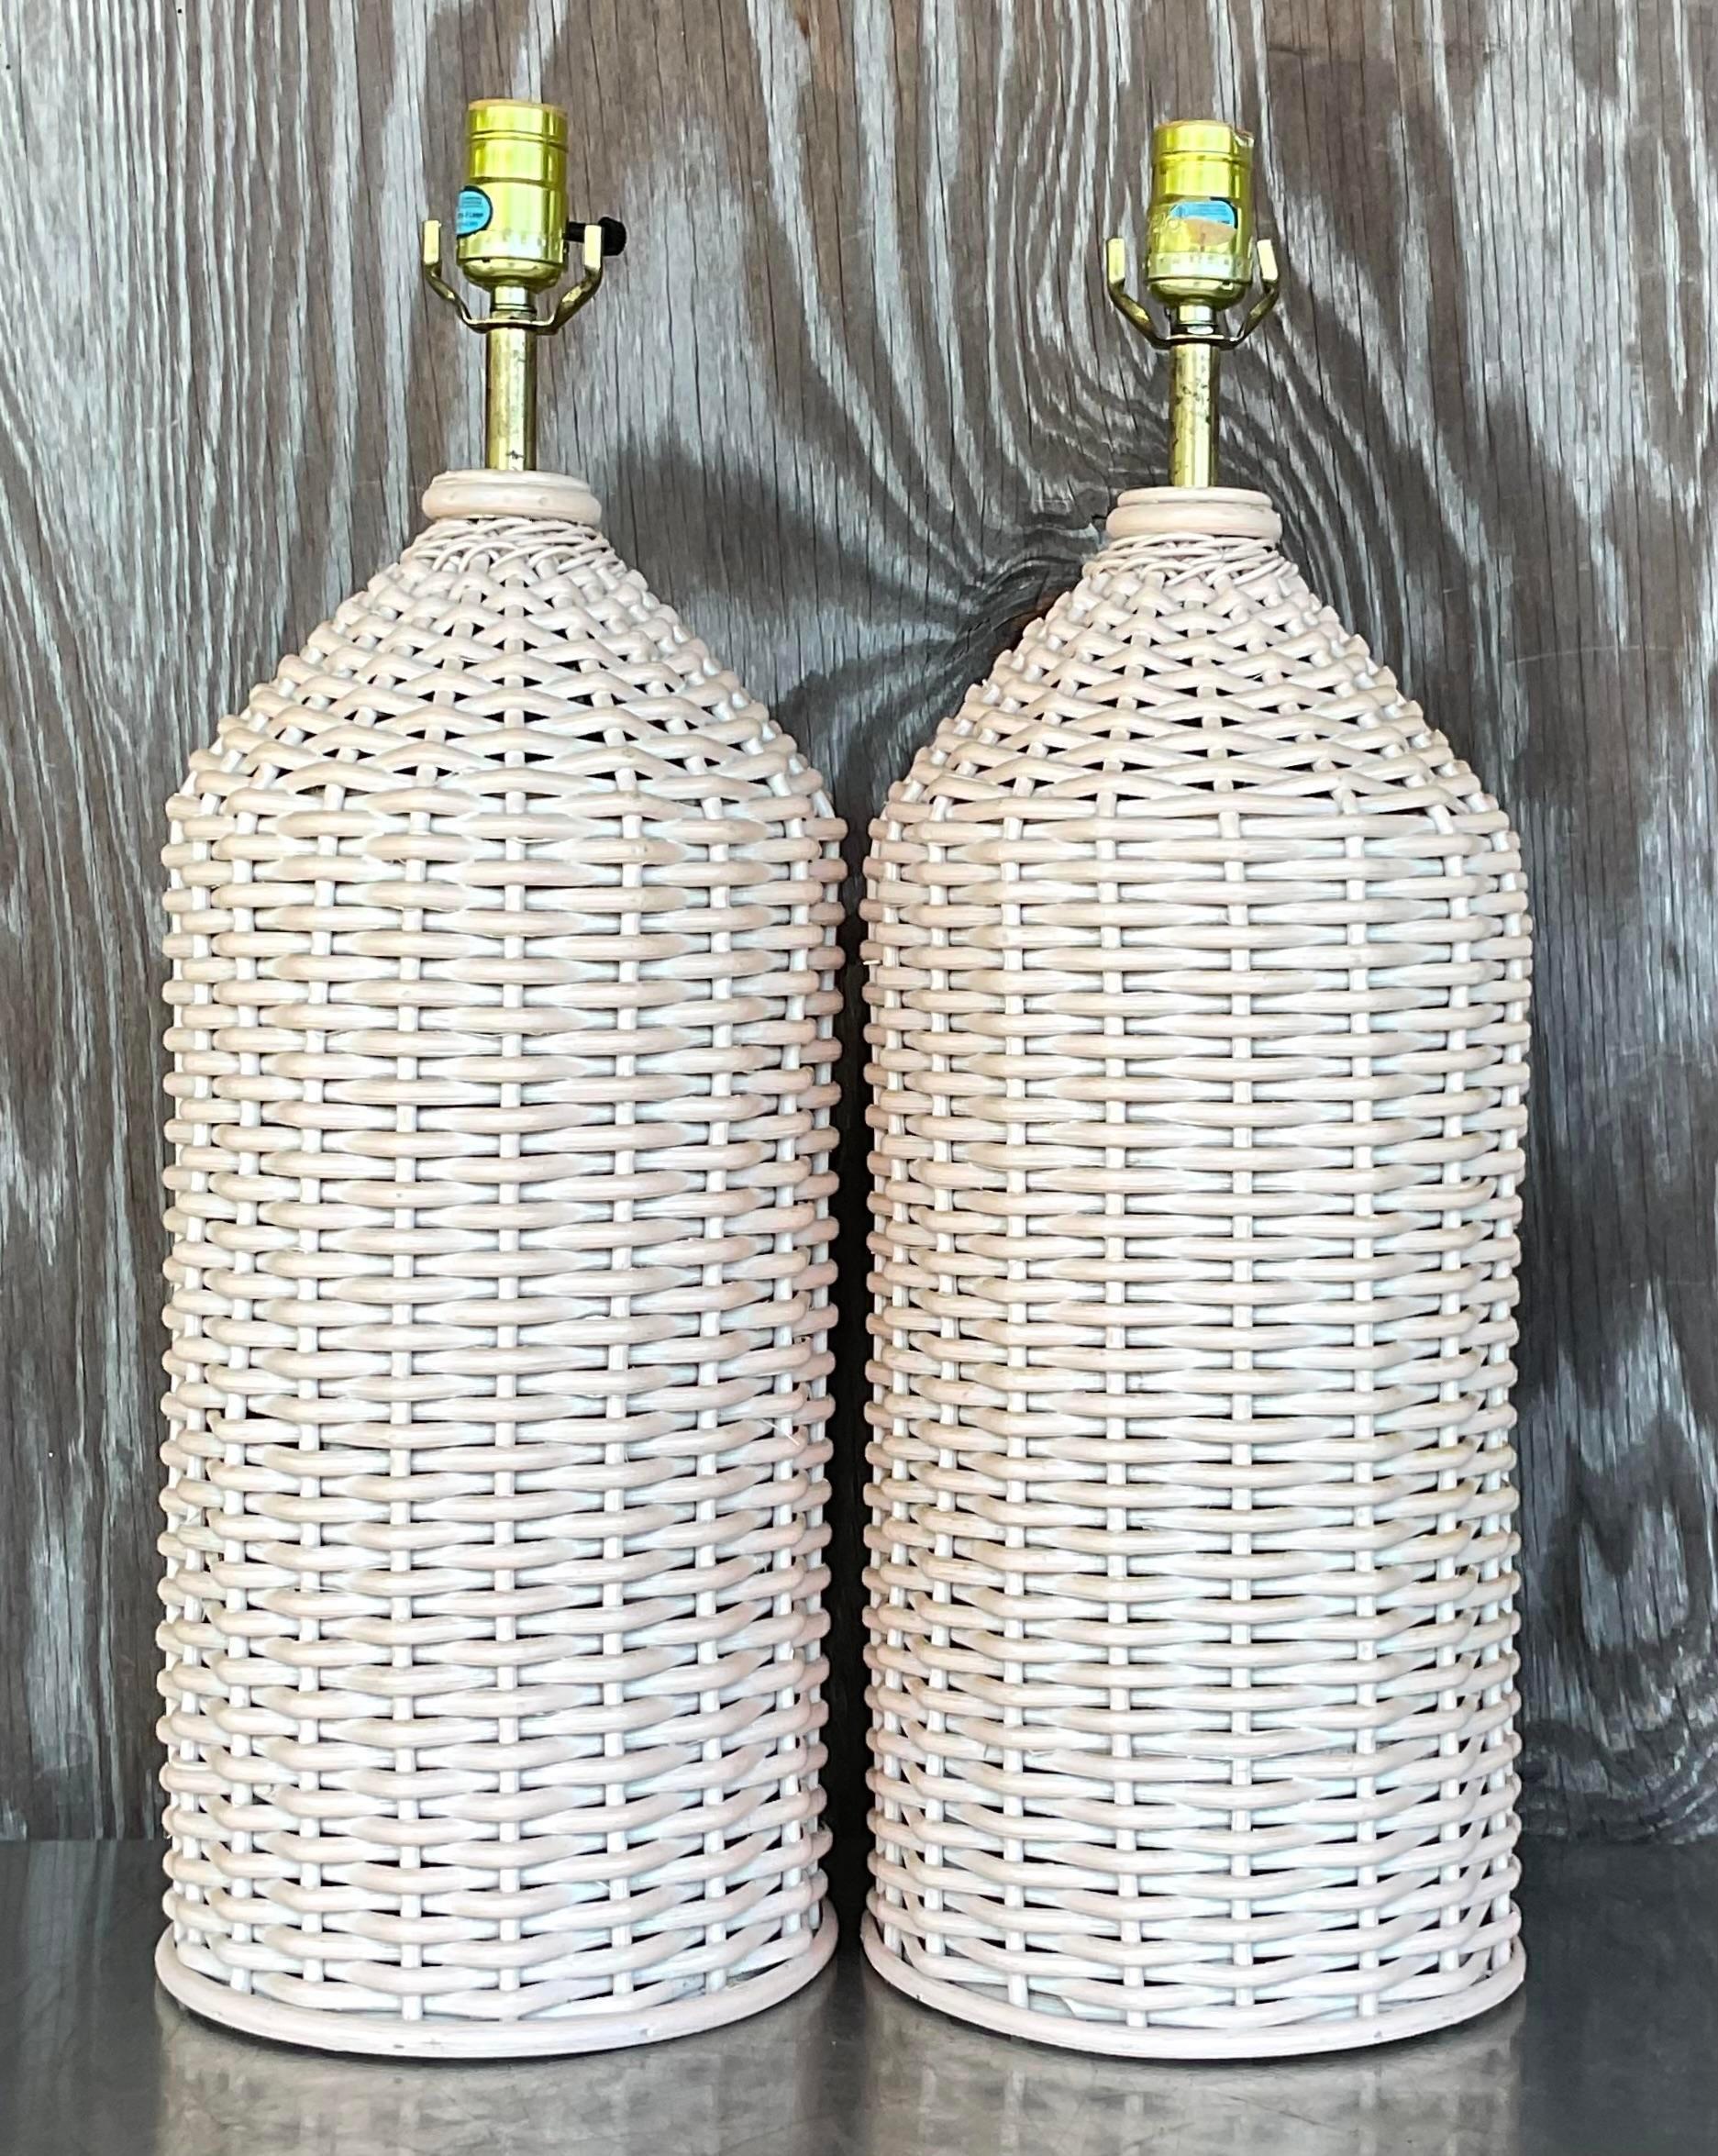 20th Century Vintage Coastal Woven Rattan Table Lamps - a Pair For Sale